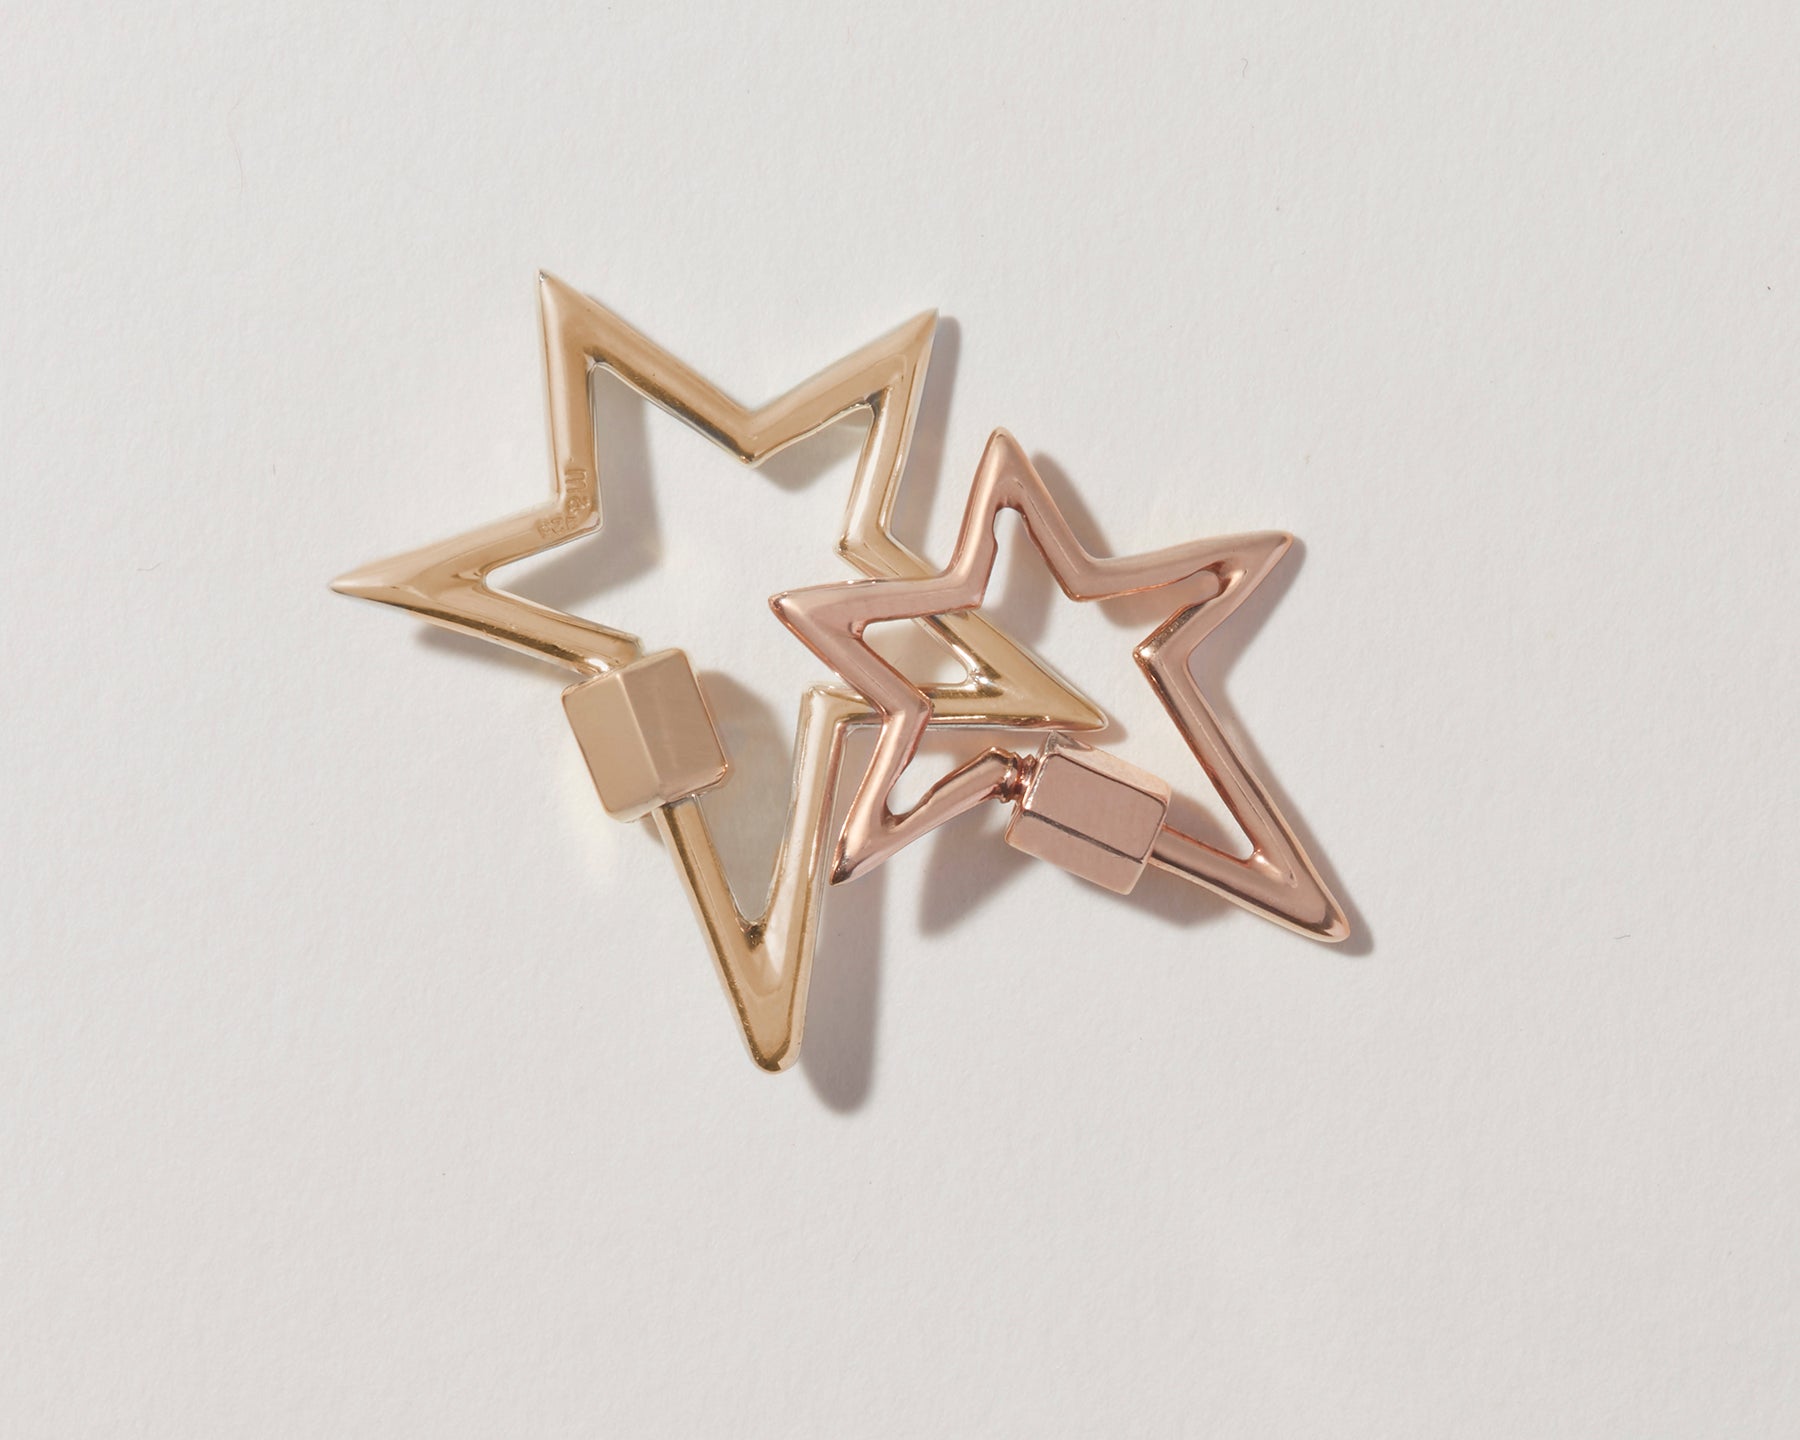 Big gold star charm and small rose gold star charm against gray backdrop